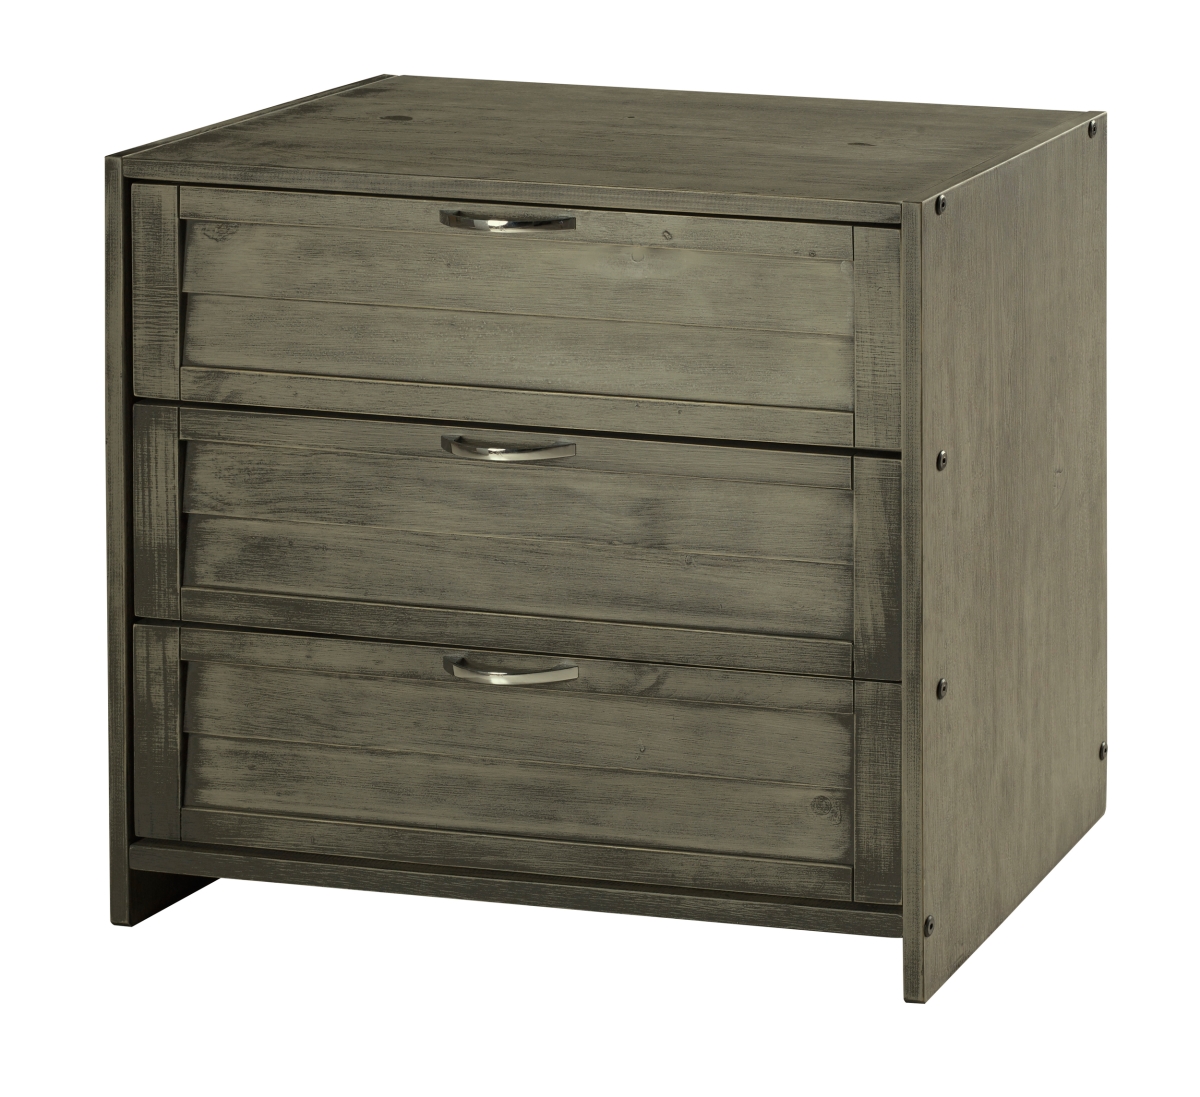 Pd-790b-ag Louver 3 Drawer Chest In Antique Grey